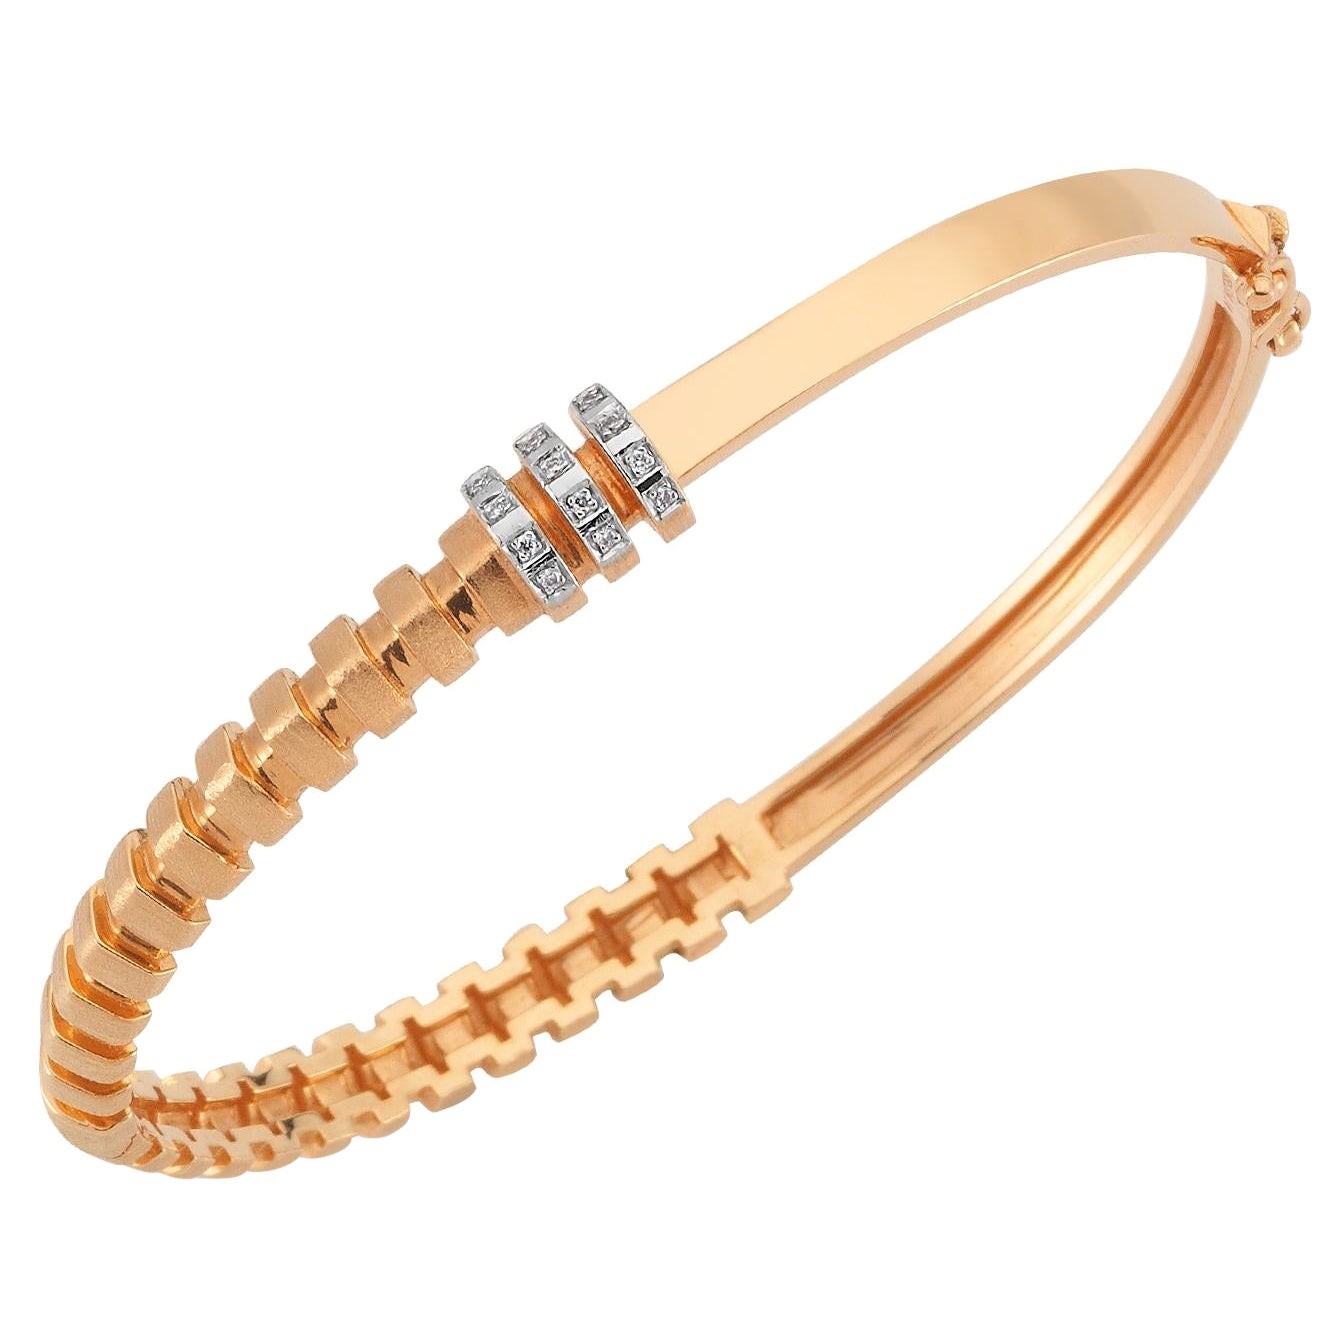 Taotie Wide Bangle in 14K Rose Gold by Selda Jewellery For Sale